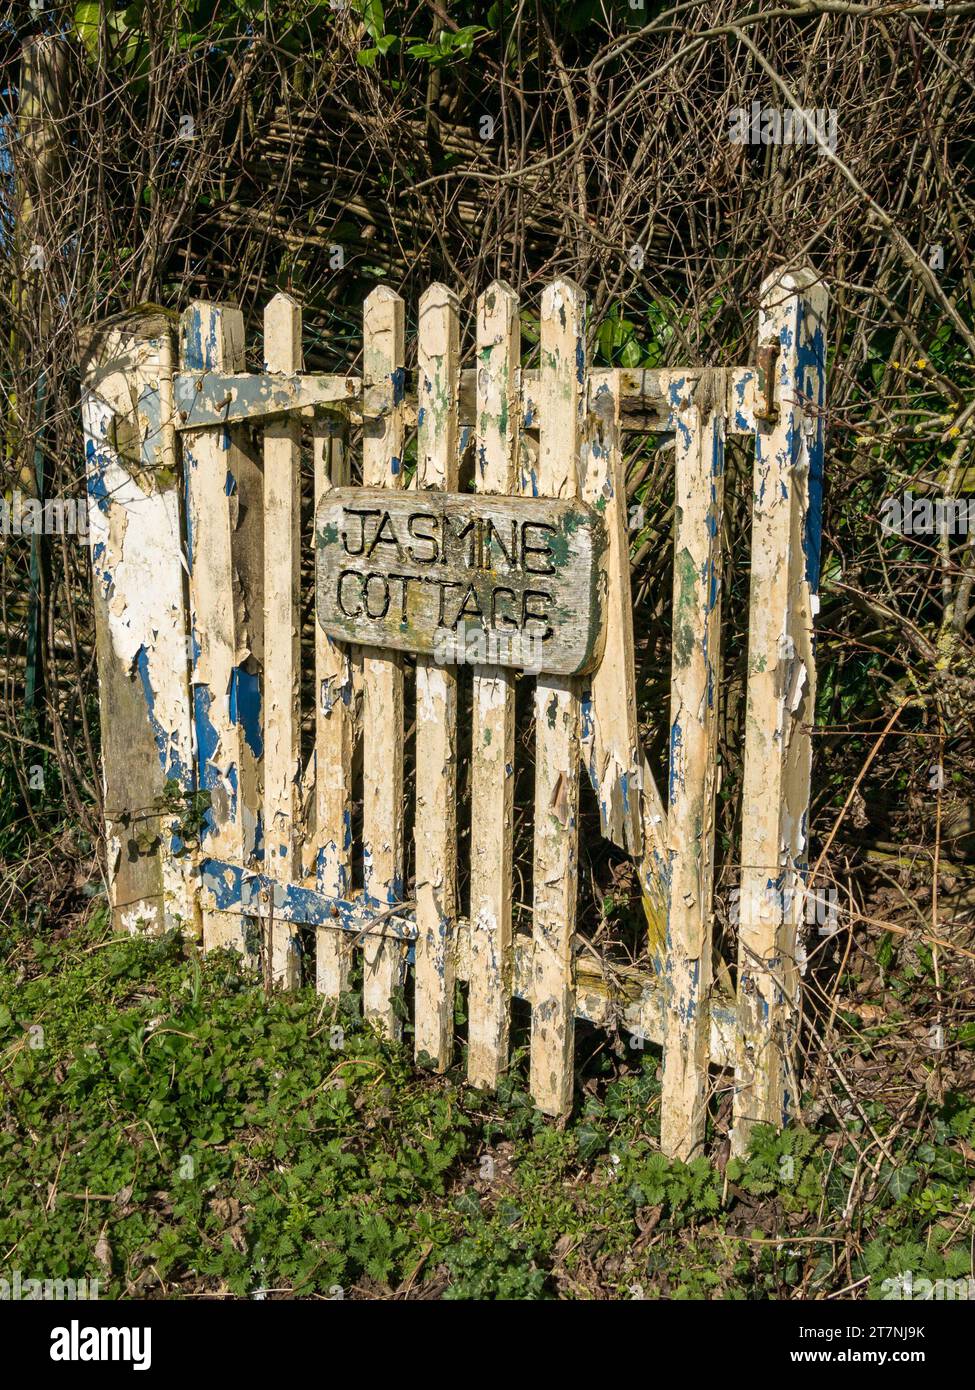 Old distressed wooden garden gate for 'Jasmine Cottage' with peeling paint and rotting timber, Wyfordby, Leicestershire, England, UK Stock Photo